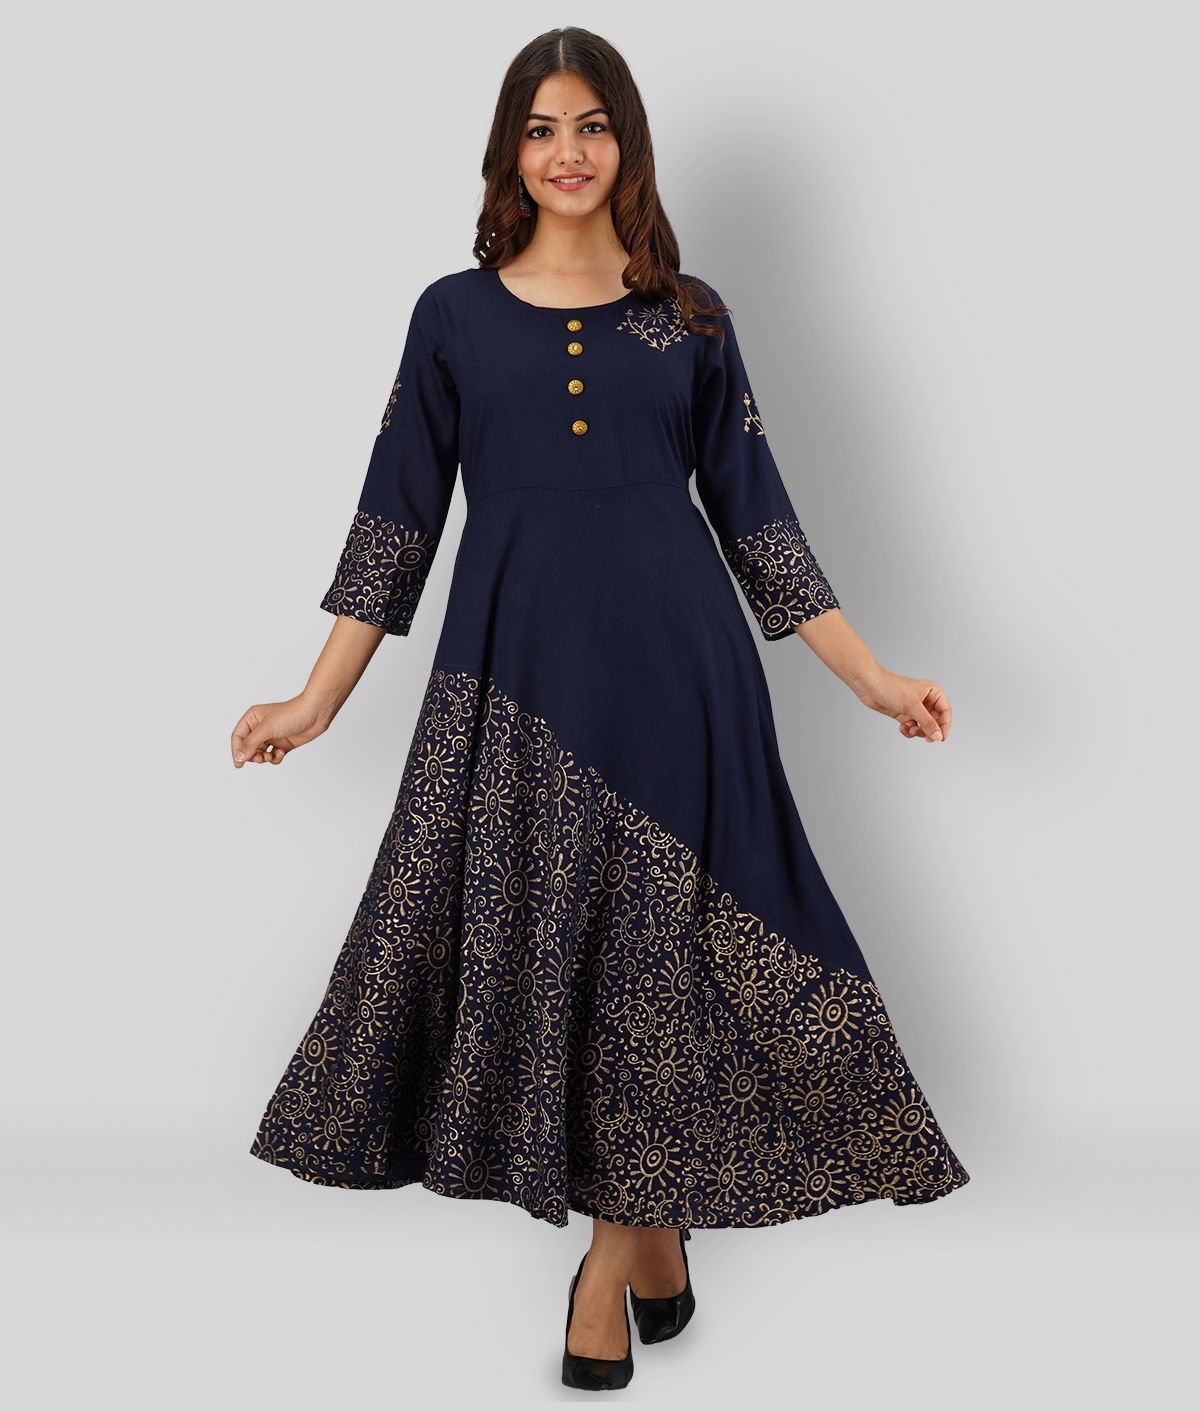 FABRR - Navy Rayon Women's Flared Kurti ( Pack of 1 )